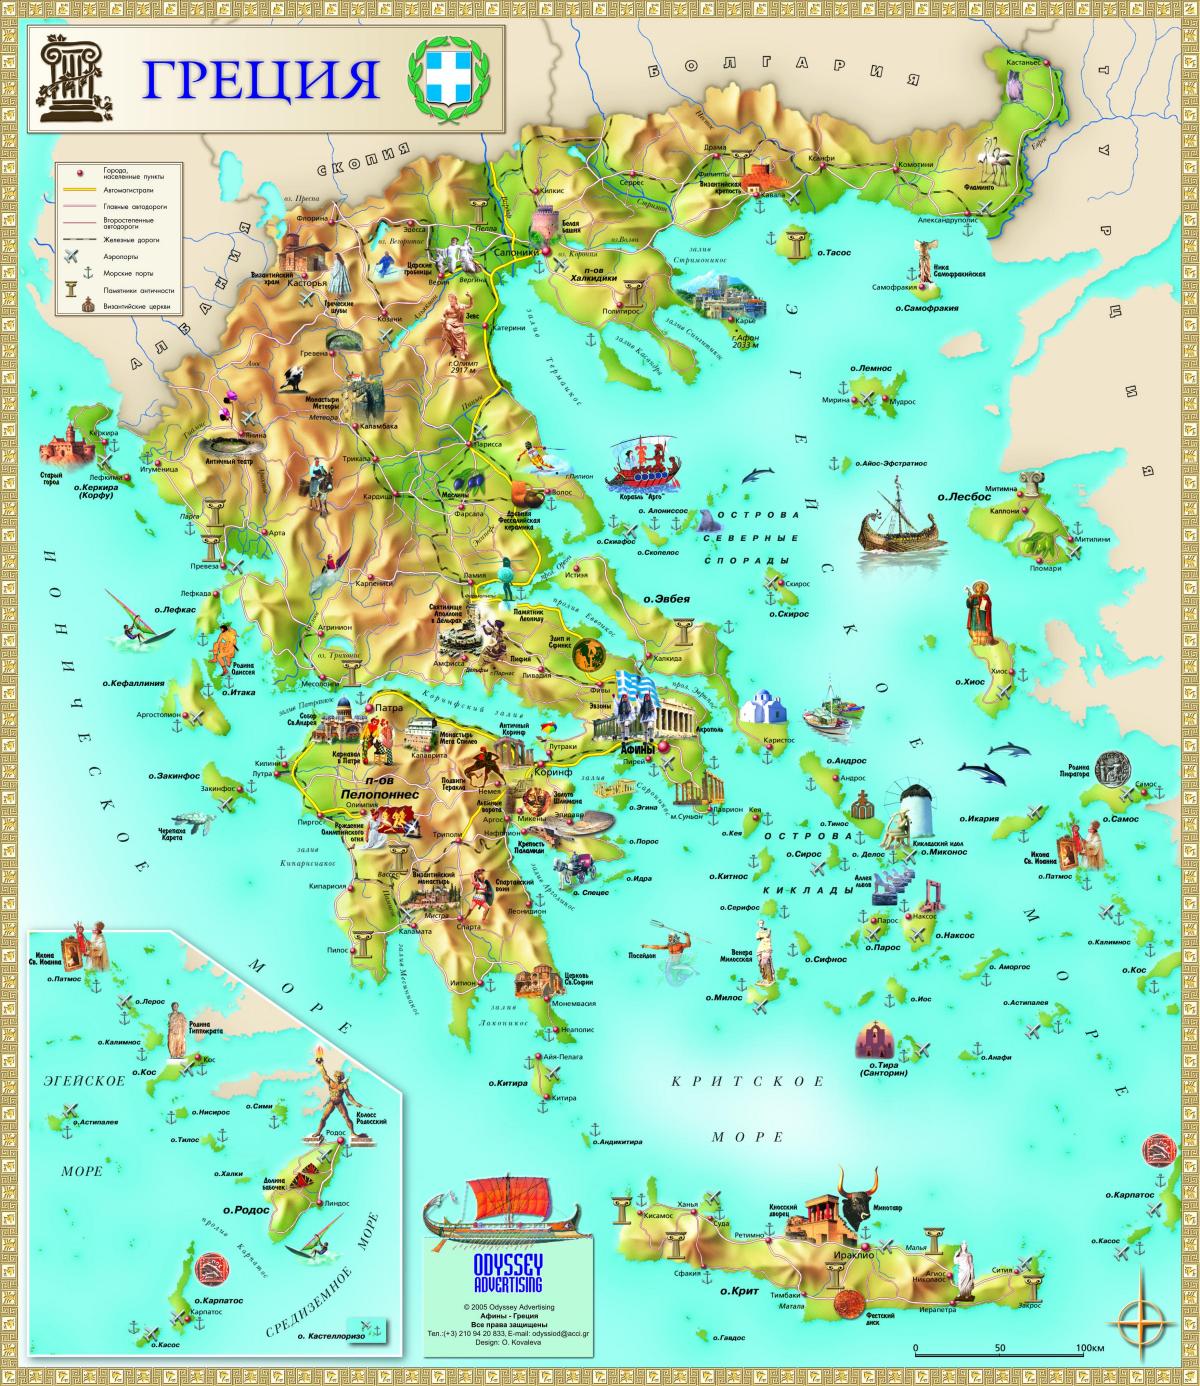 Greece tourist attractions map - Greece map tourist attractions ...